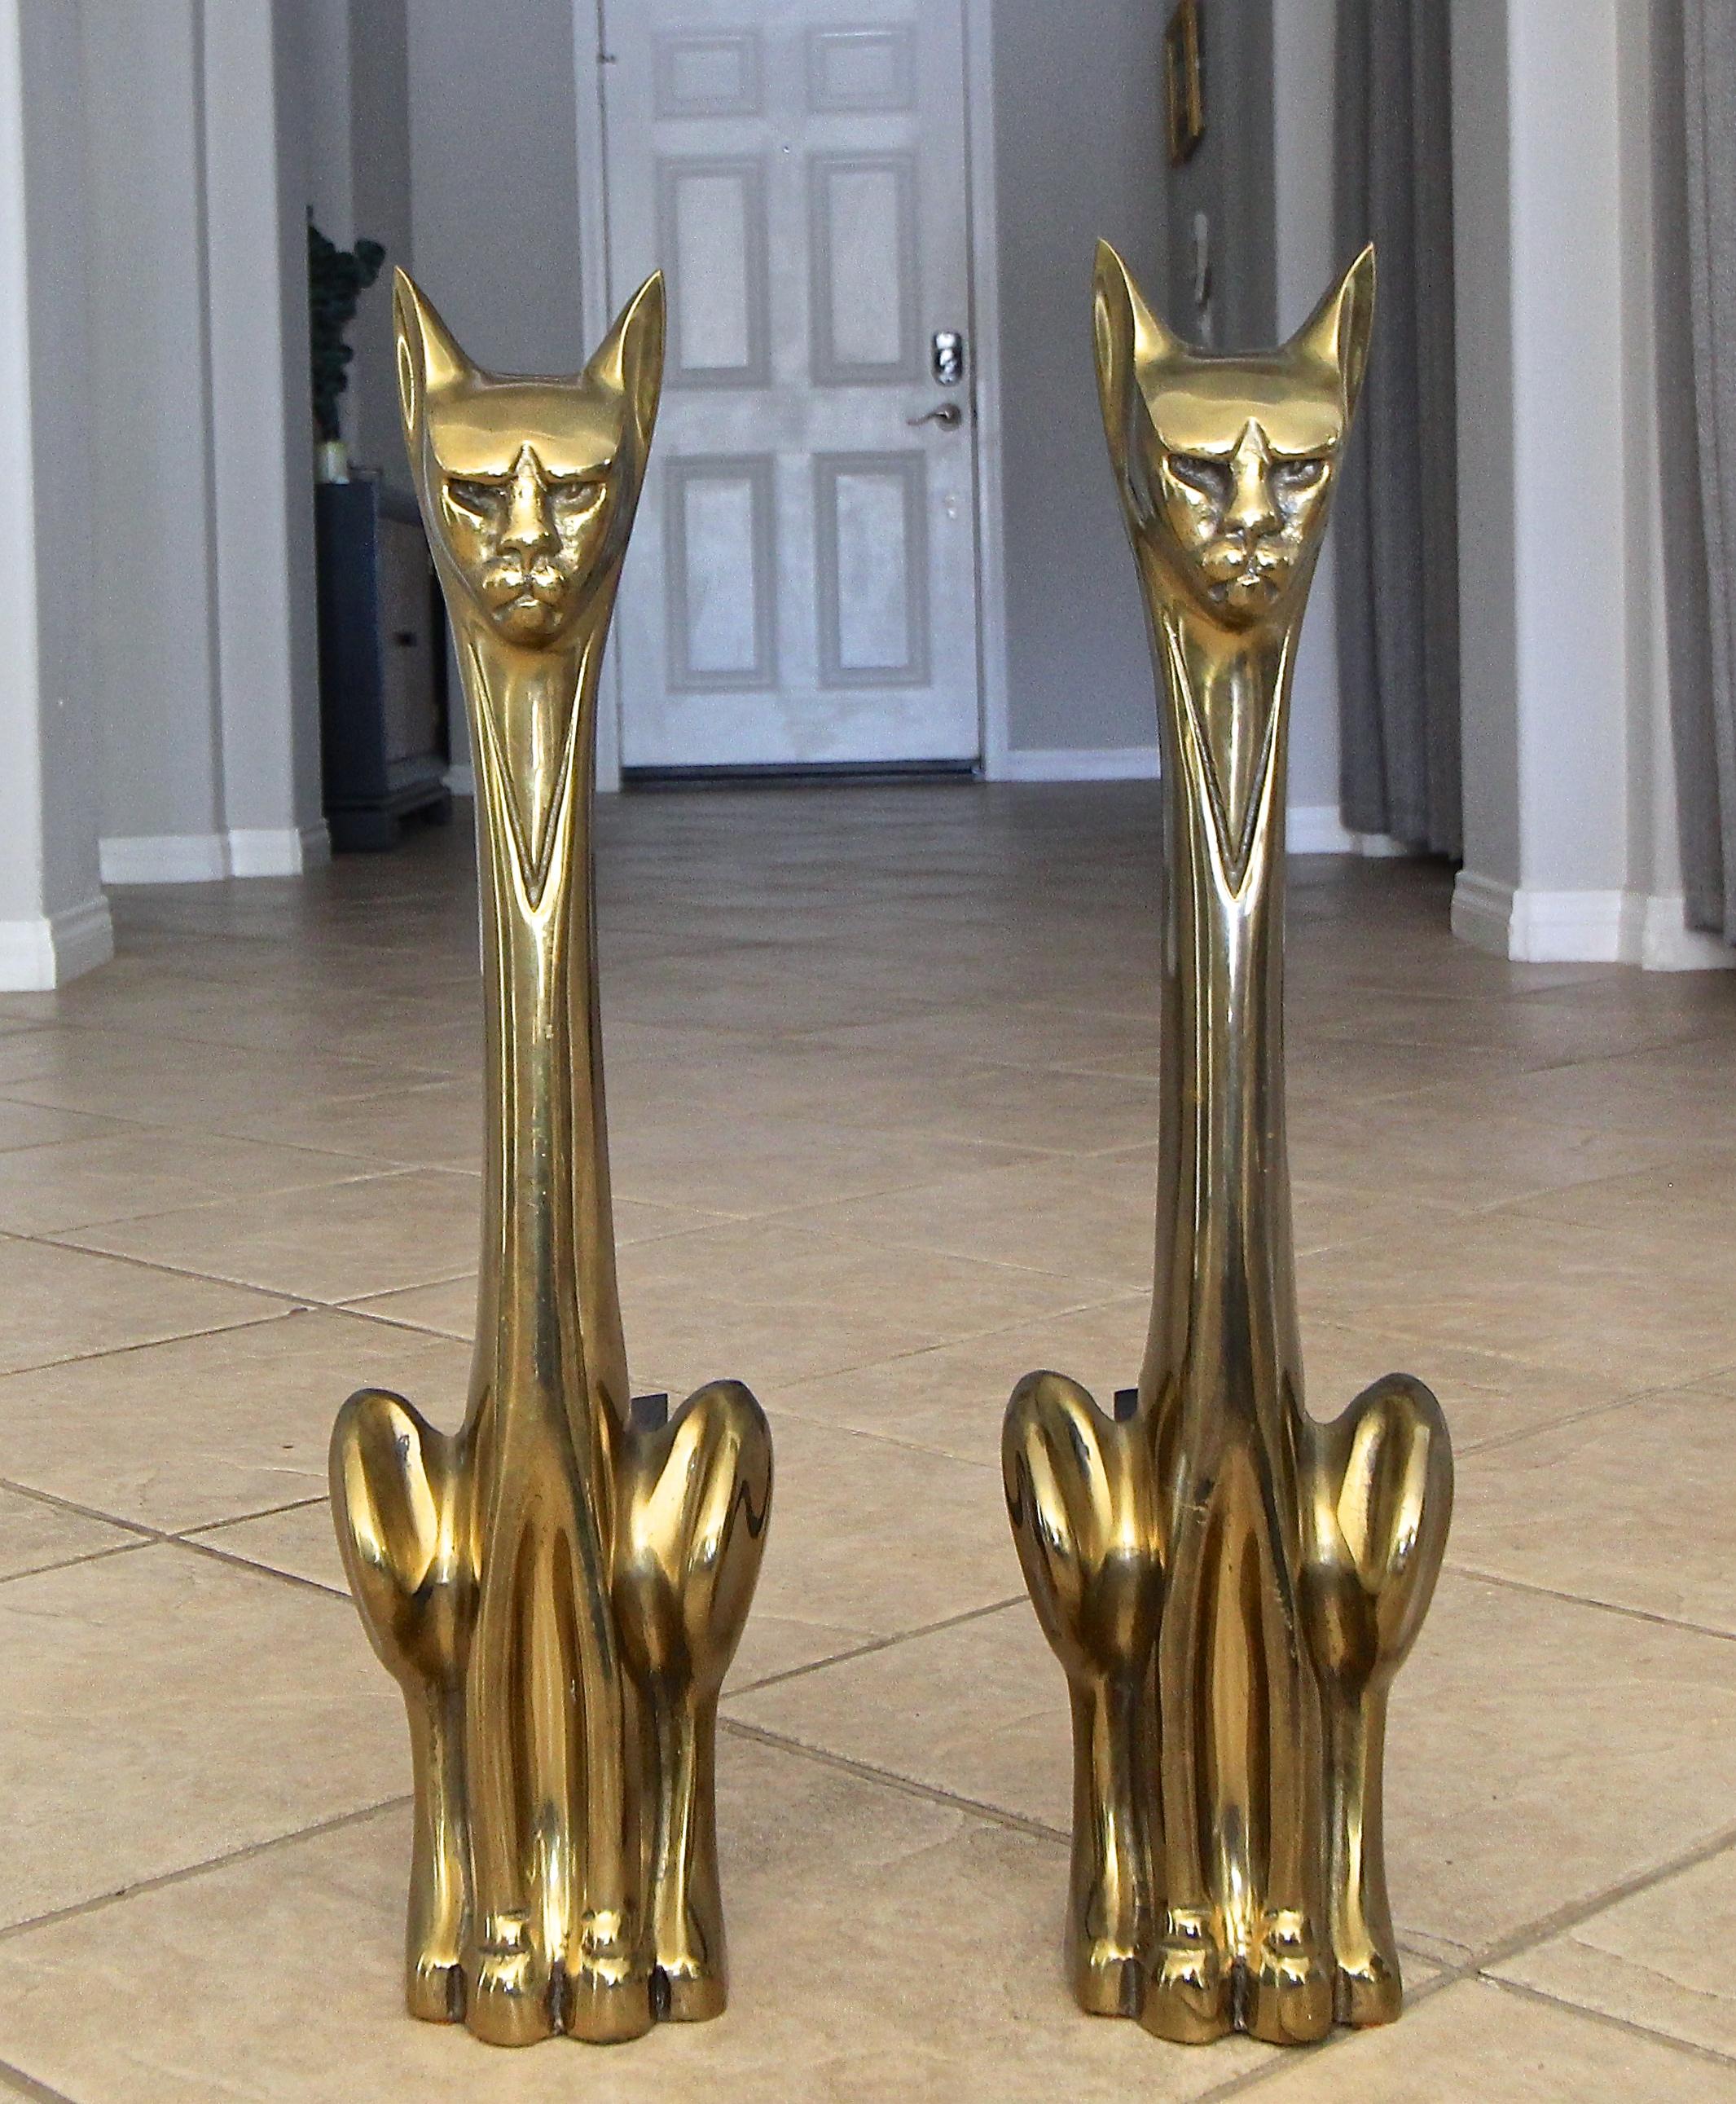 Pair of tall stylized solid brass Siamese cat fireplace andirons. Good vintage condition with age appropriate patina.